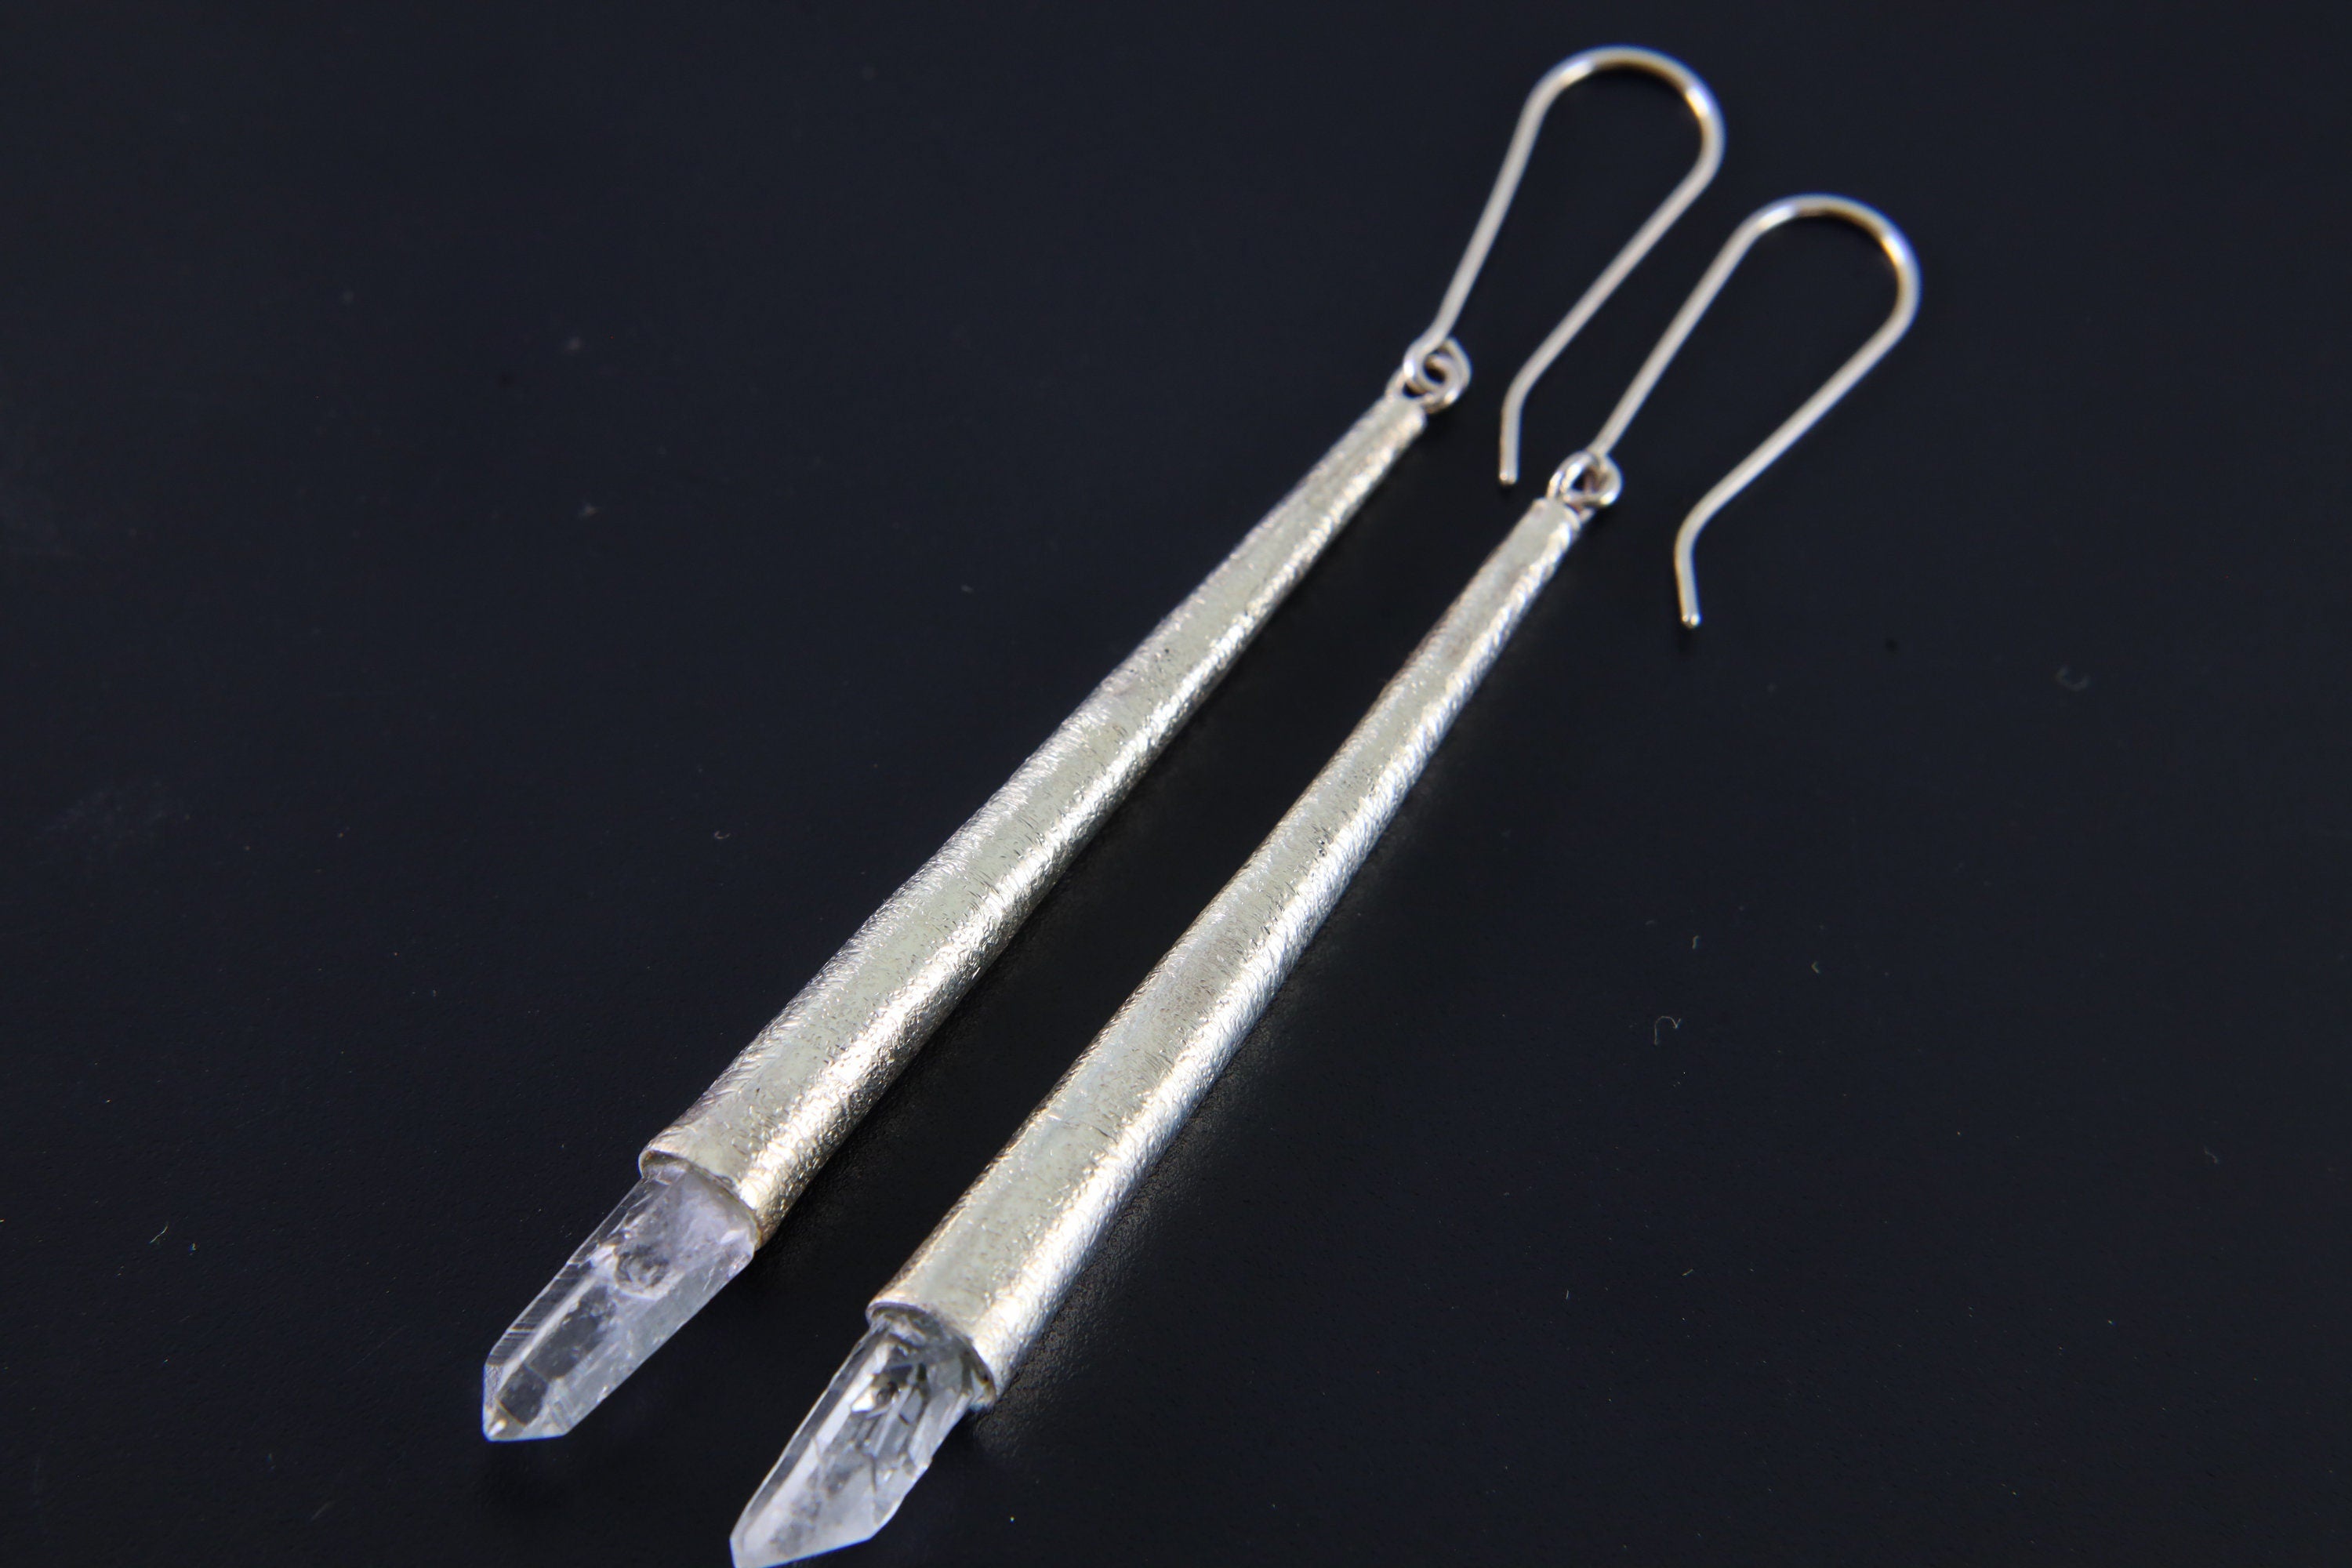 Sterling Silver Earrings with Lemurian Quartz Point Silver Spire Cones - High Shine Polish Sand Textured Finish - Enhances Energy & Healing